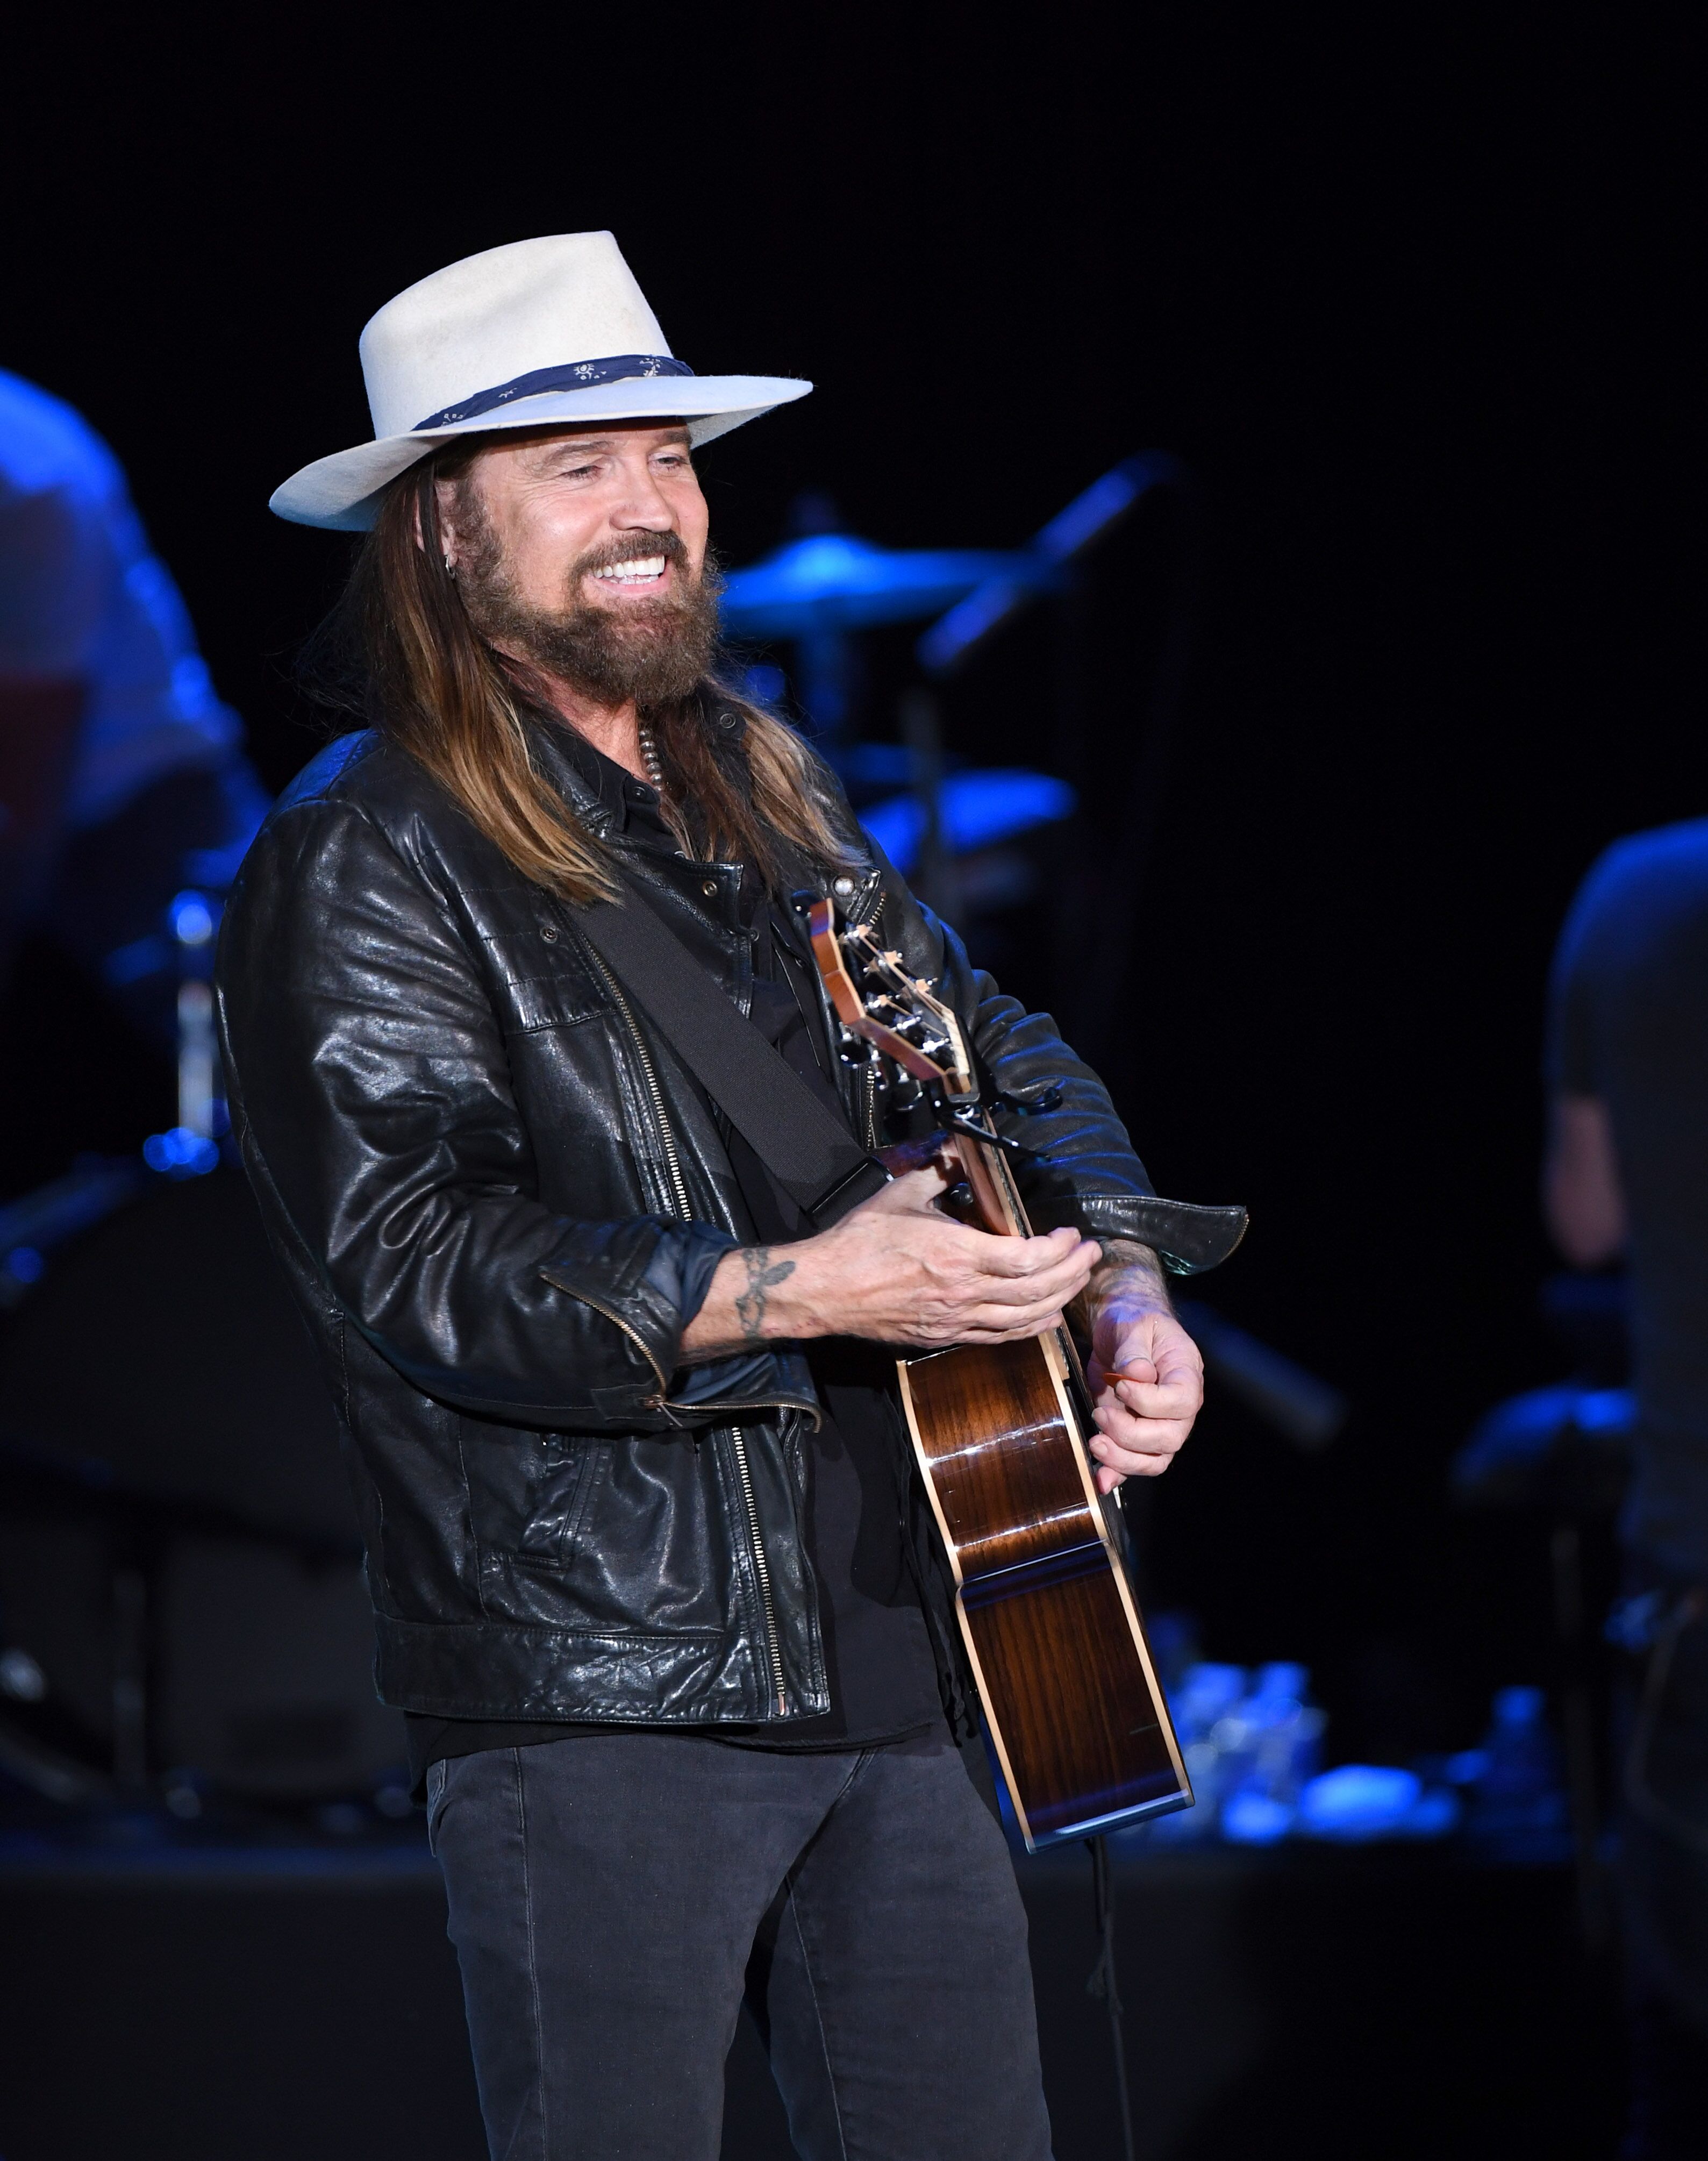 Billy Ray Cyrus kicks-off his five-show residency "Billy Ray Cyrus - The Residency" at The Orleans Showroom on May 7, 2019, in Las Vegas, Nevada | Photo: Ethan Miller/Getty Images